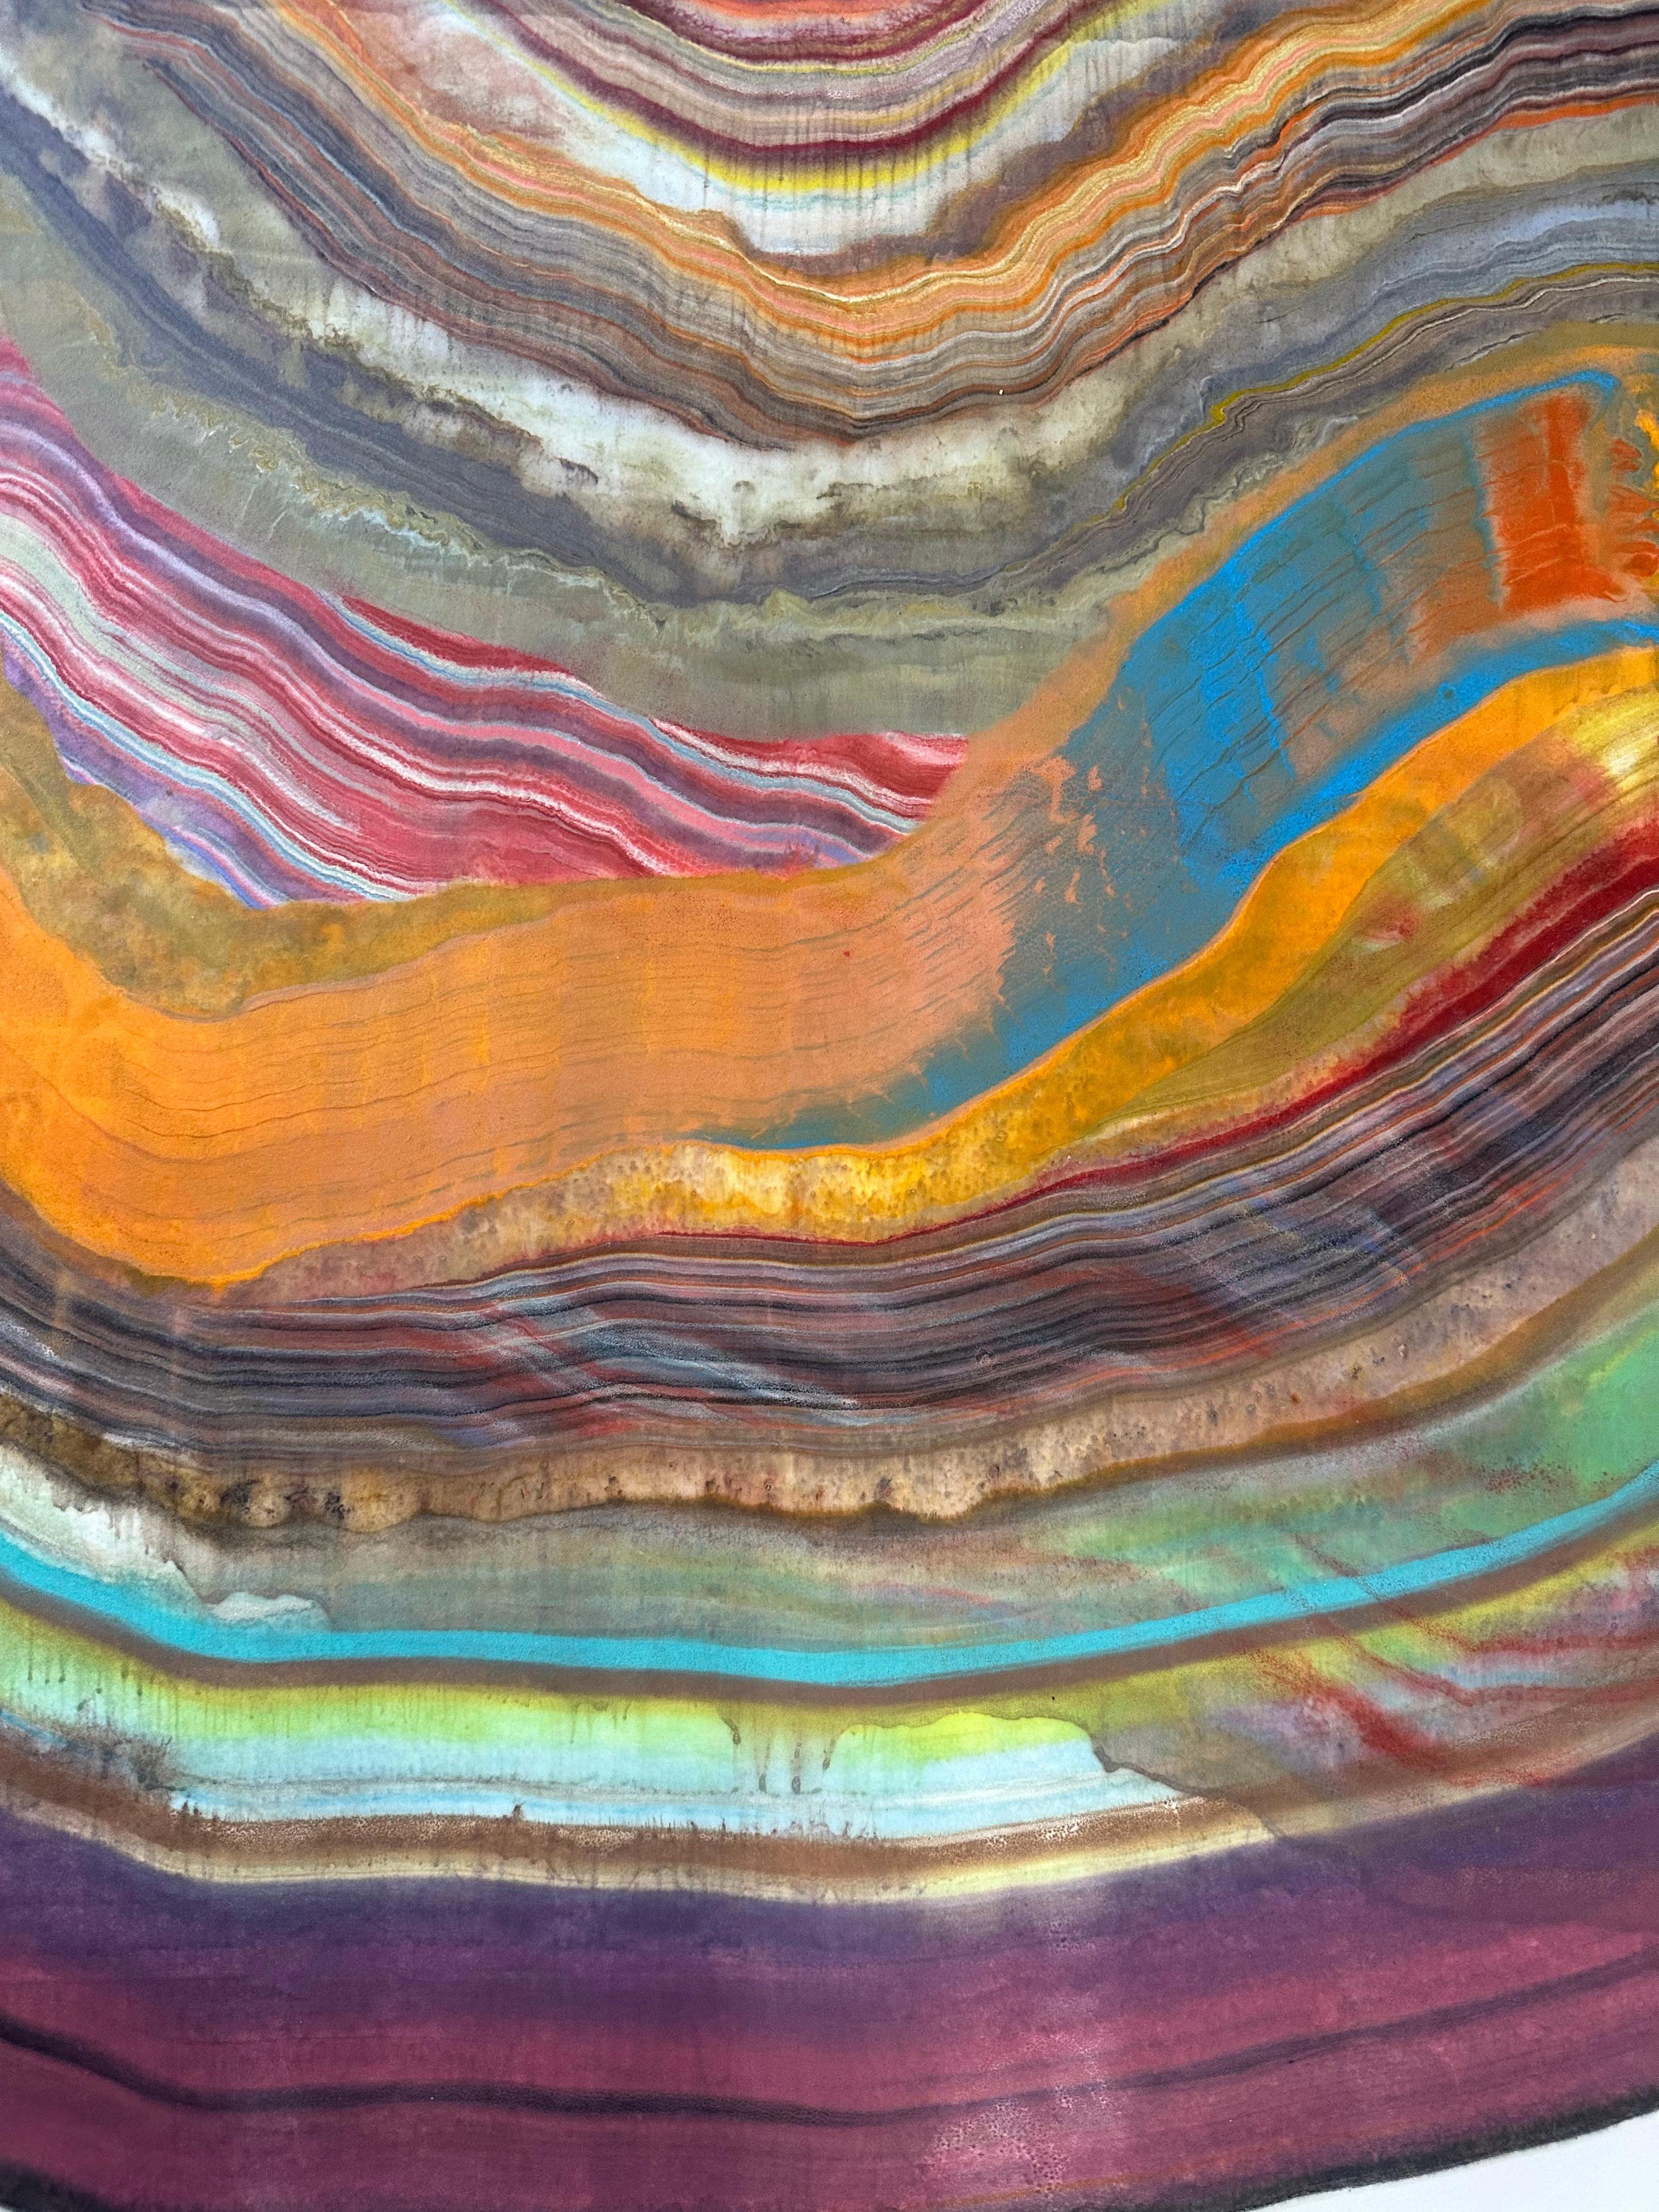 Laura Moriarty's The Wild Uncut World is a multicolored encaustic monotype on kozo paper. Layers of pigmented beeswax on lightweight paper create an undulating composition suggesting layers of the earth's crust and geological formations depicted in